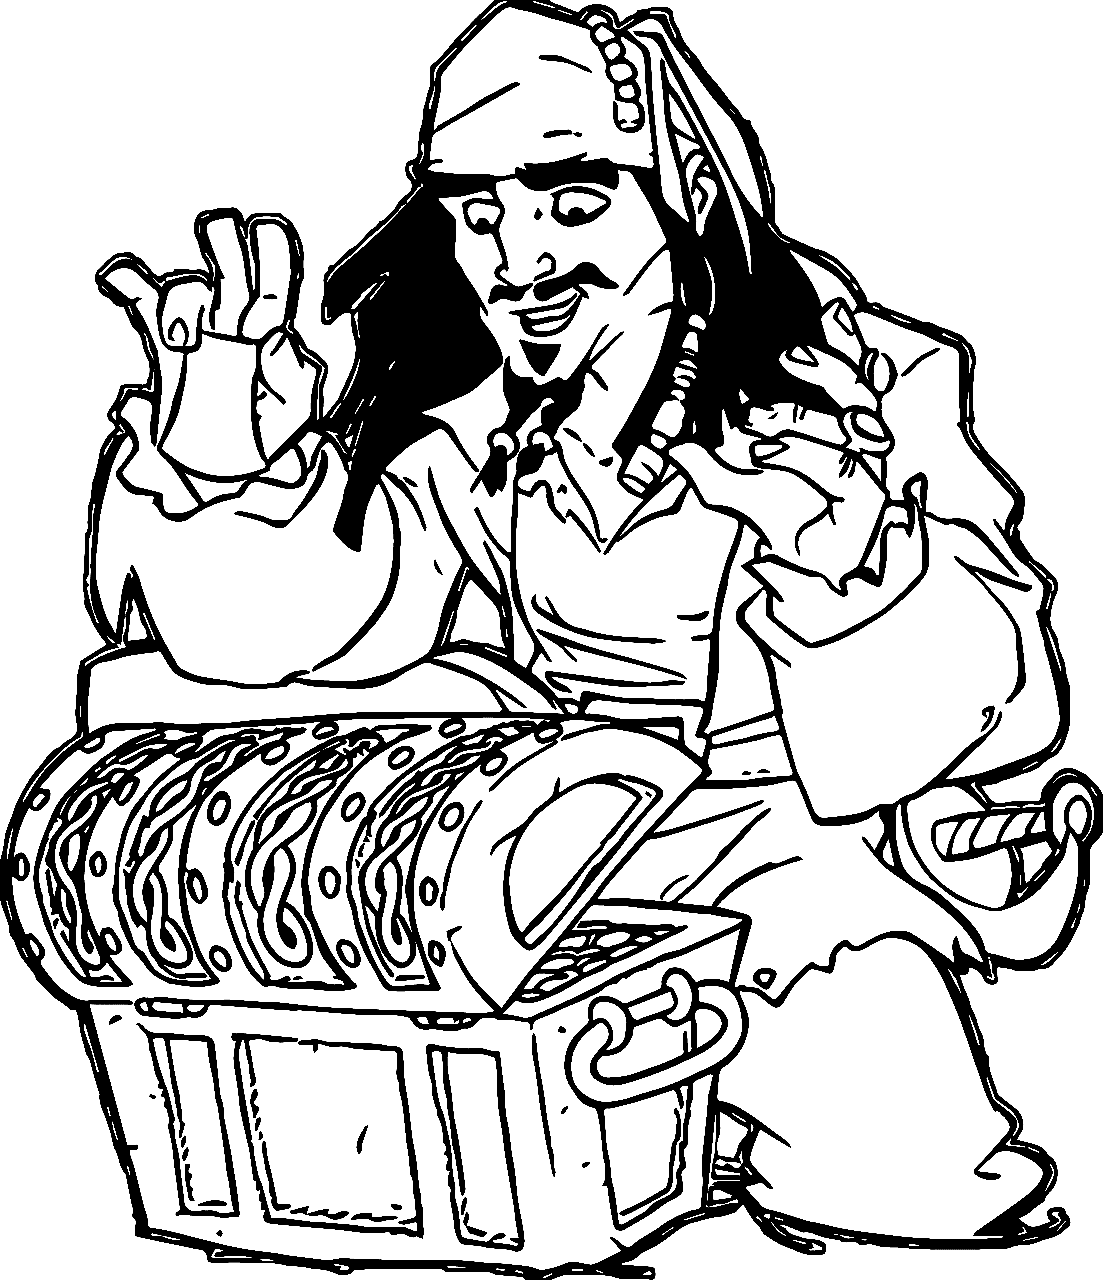 Jack Image Coloring Page